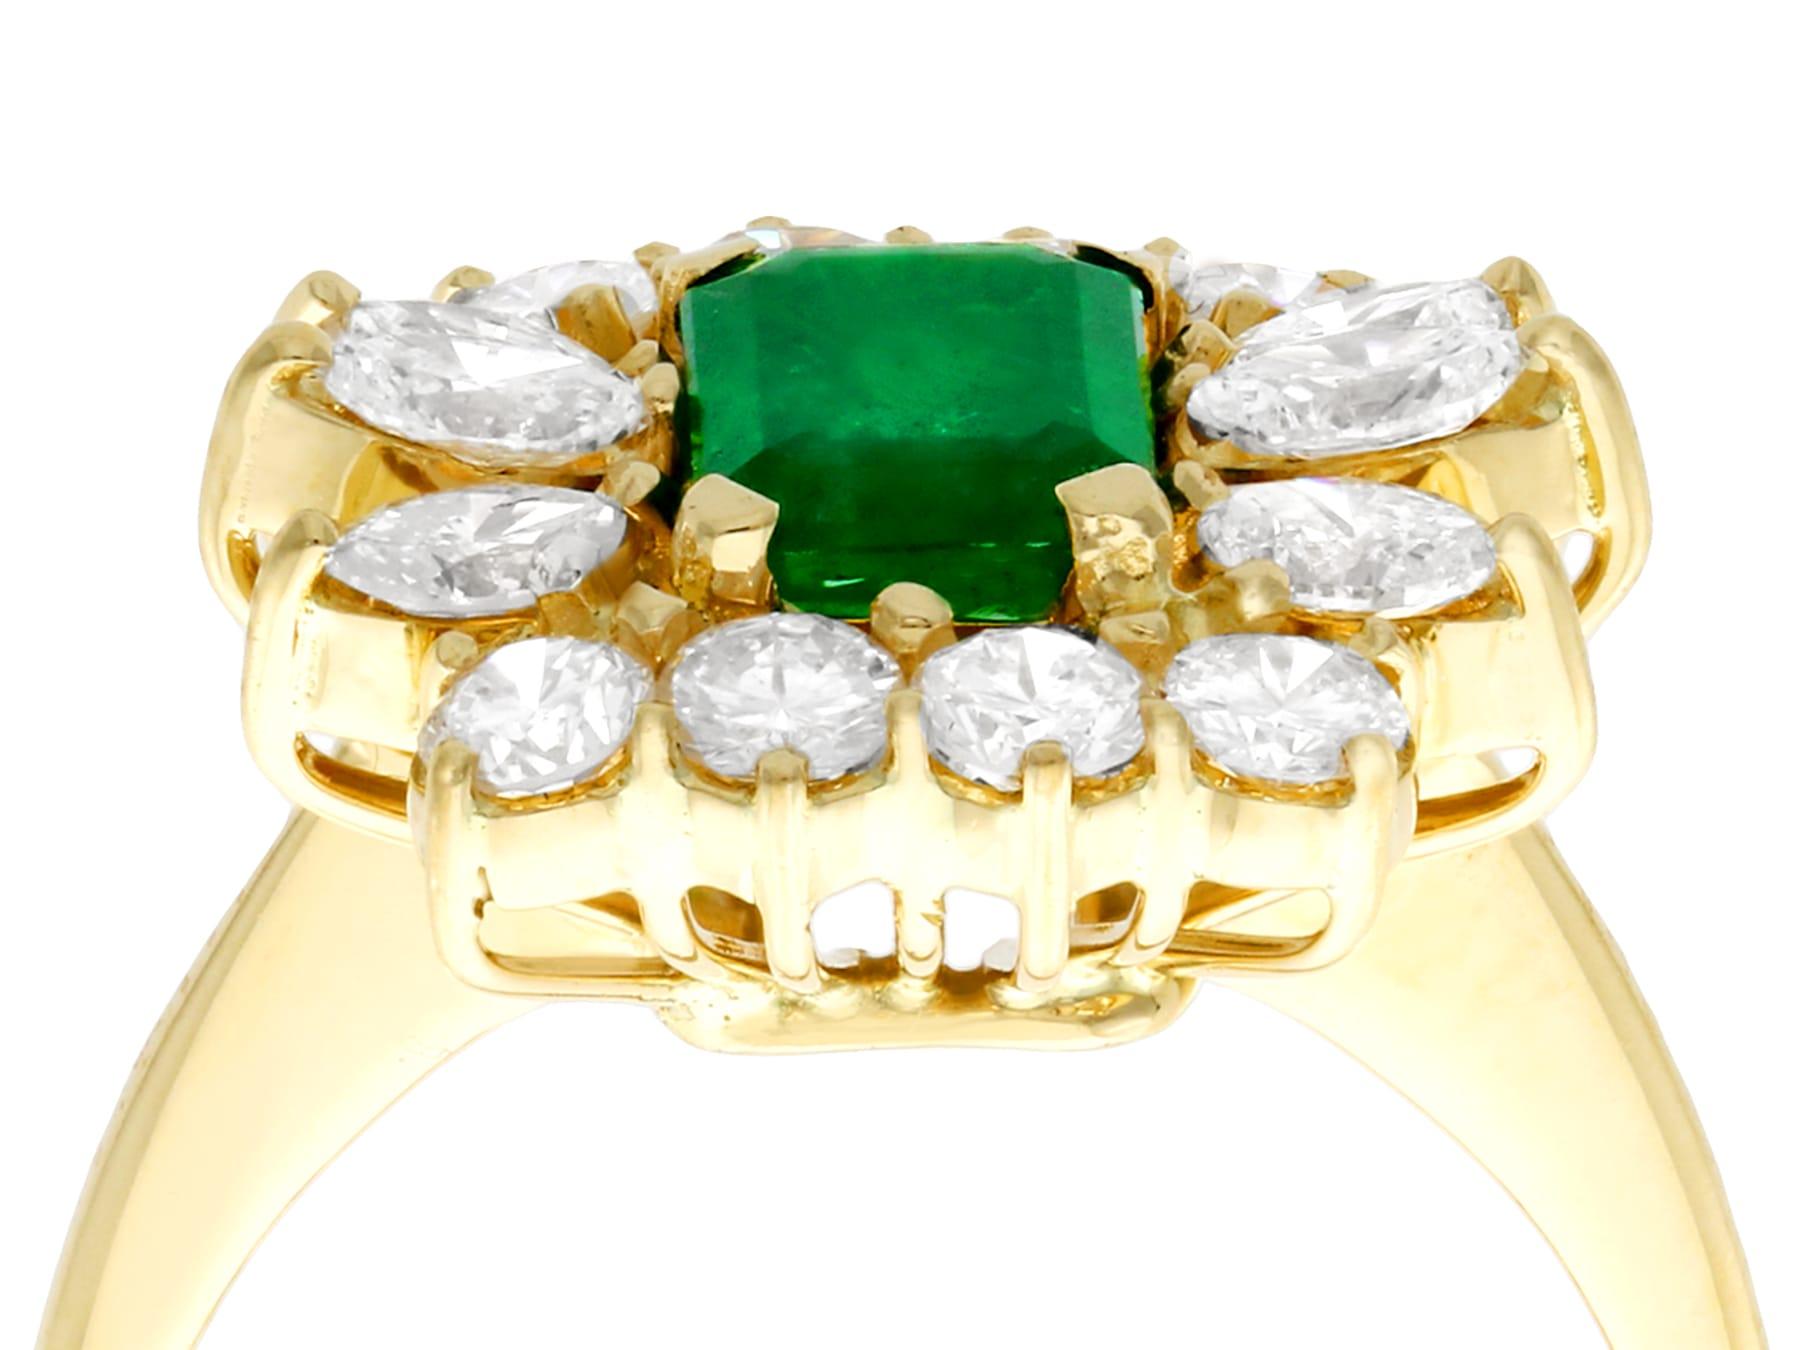 A stunning vintage 0.81 Ct emerald and 1.32 Ct diamond, 18k yellow gold cocktail ring; part of our diverse gemstone estate jewelry collections.

This stunning, fine and impressive emerald cut emerald and diamond ring has been crafted in 18k yellow